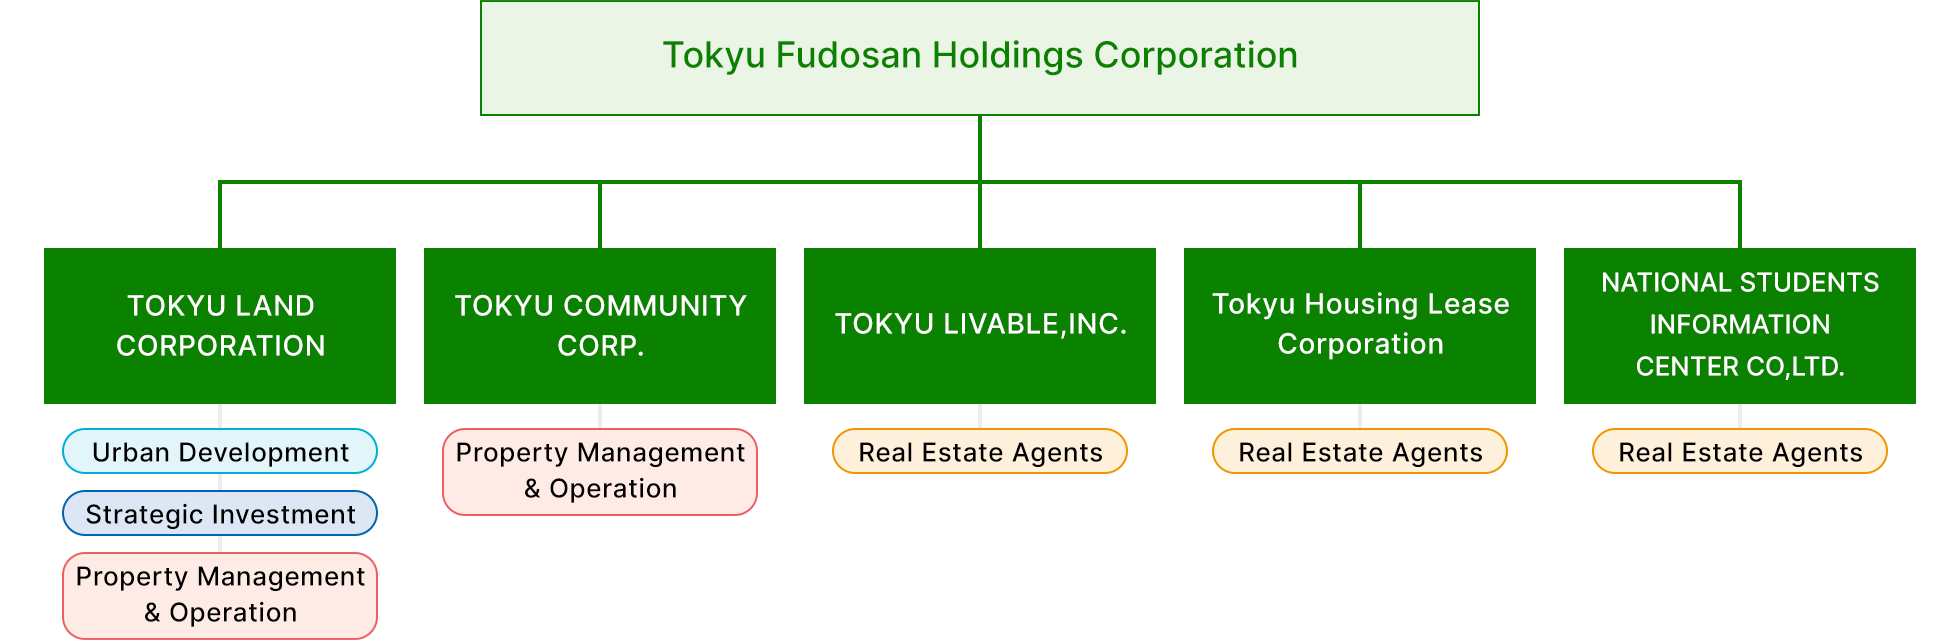 Tokyu Fudosan Holdings Group,Holdings system